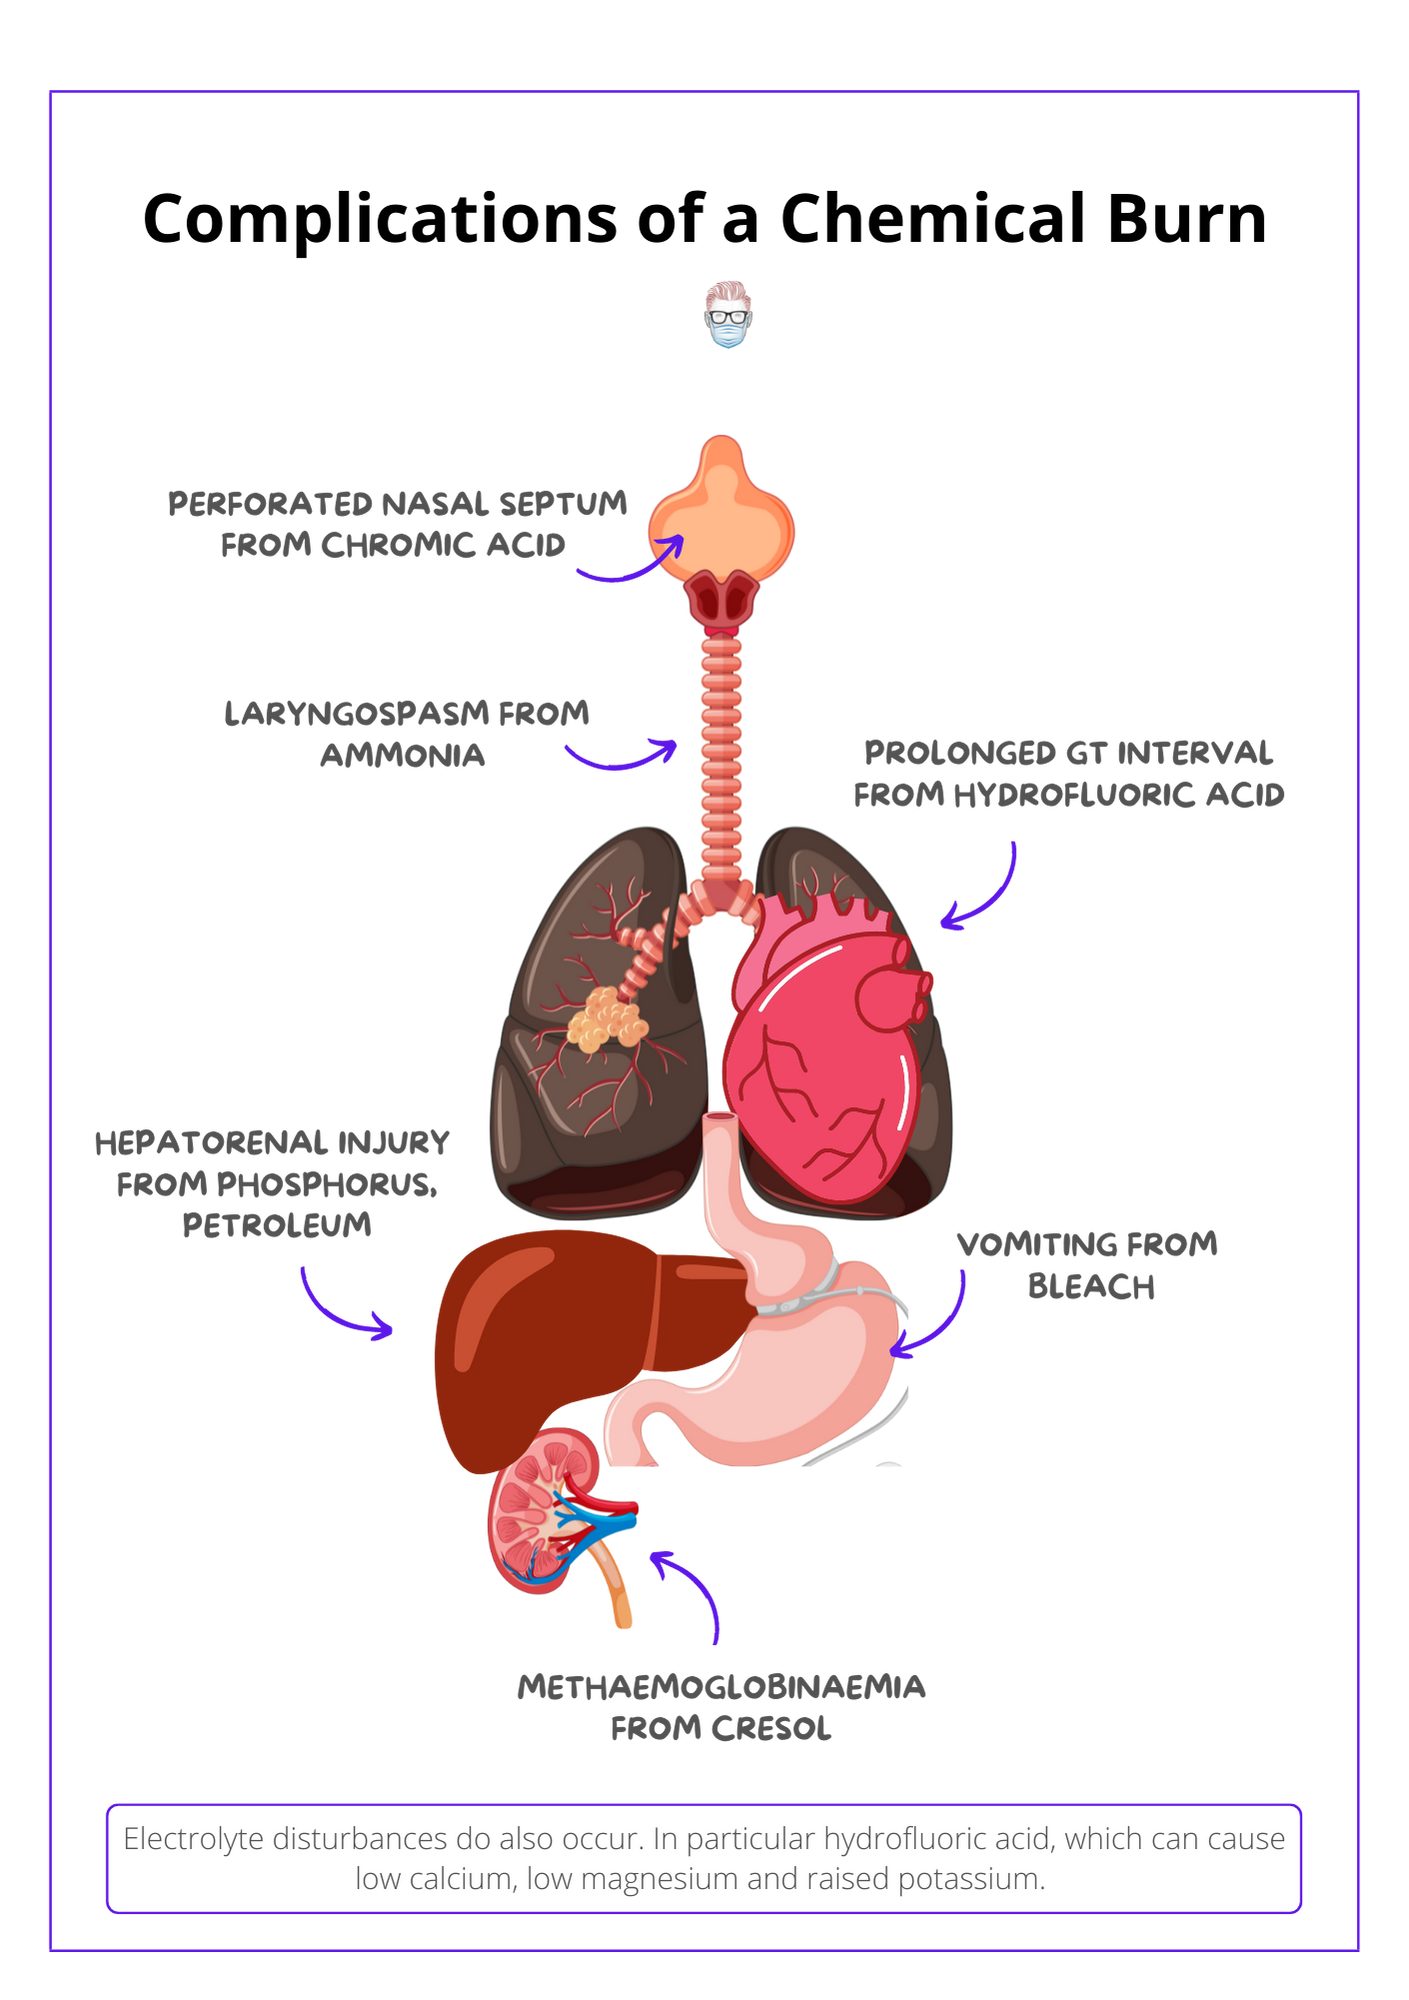 A visual summary labelling the complications and effects of chemical burns on lungs, heart, liver, kindey and electrolytes